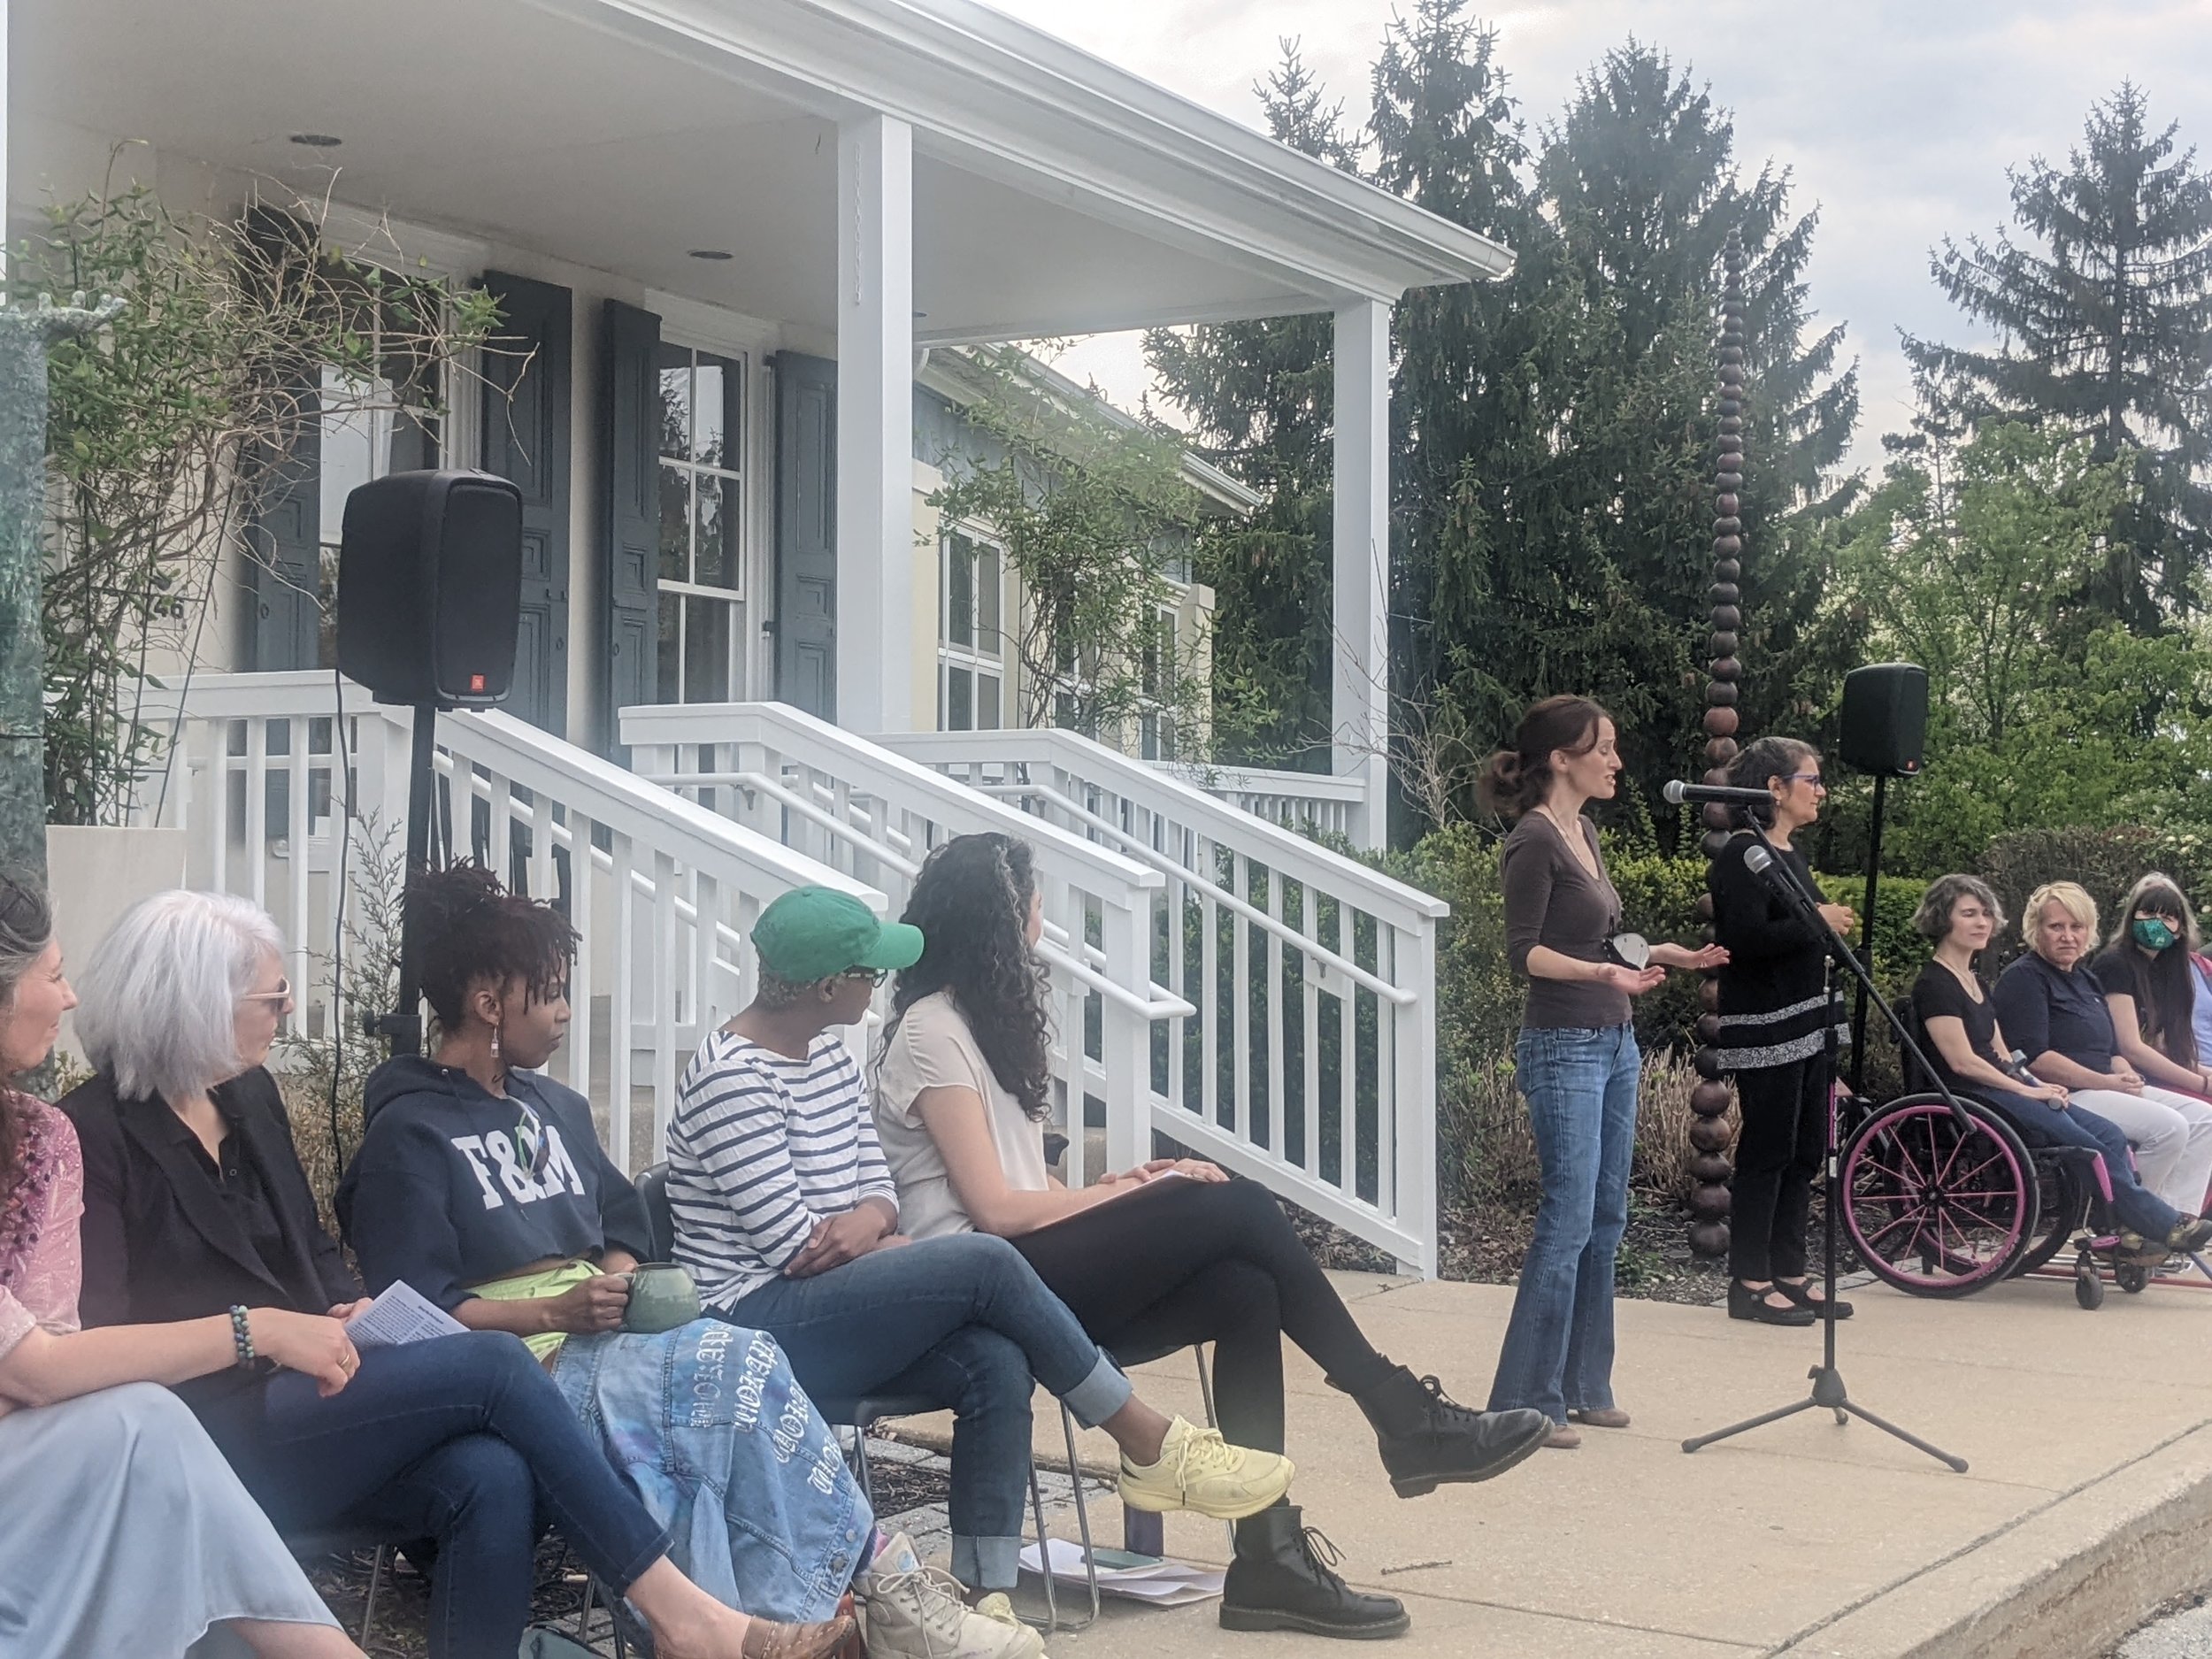  Live H-CAN Story Share Event on May 1, 2022. A collaboration by H-CAN’s Arts Advocacy and Disability &amp; Accessibility action groups, this project was developed to help strengthen the H-CAN community by offering space for members and friends to sh